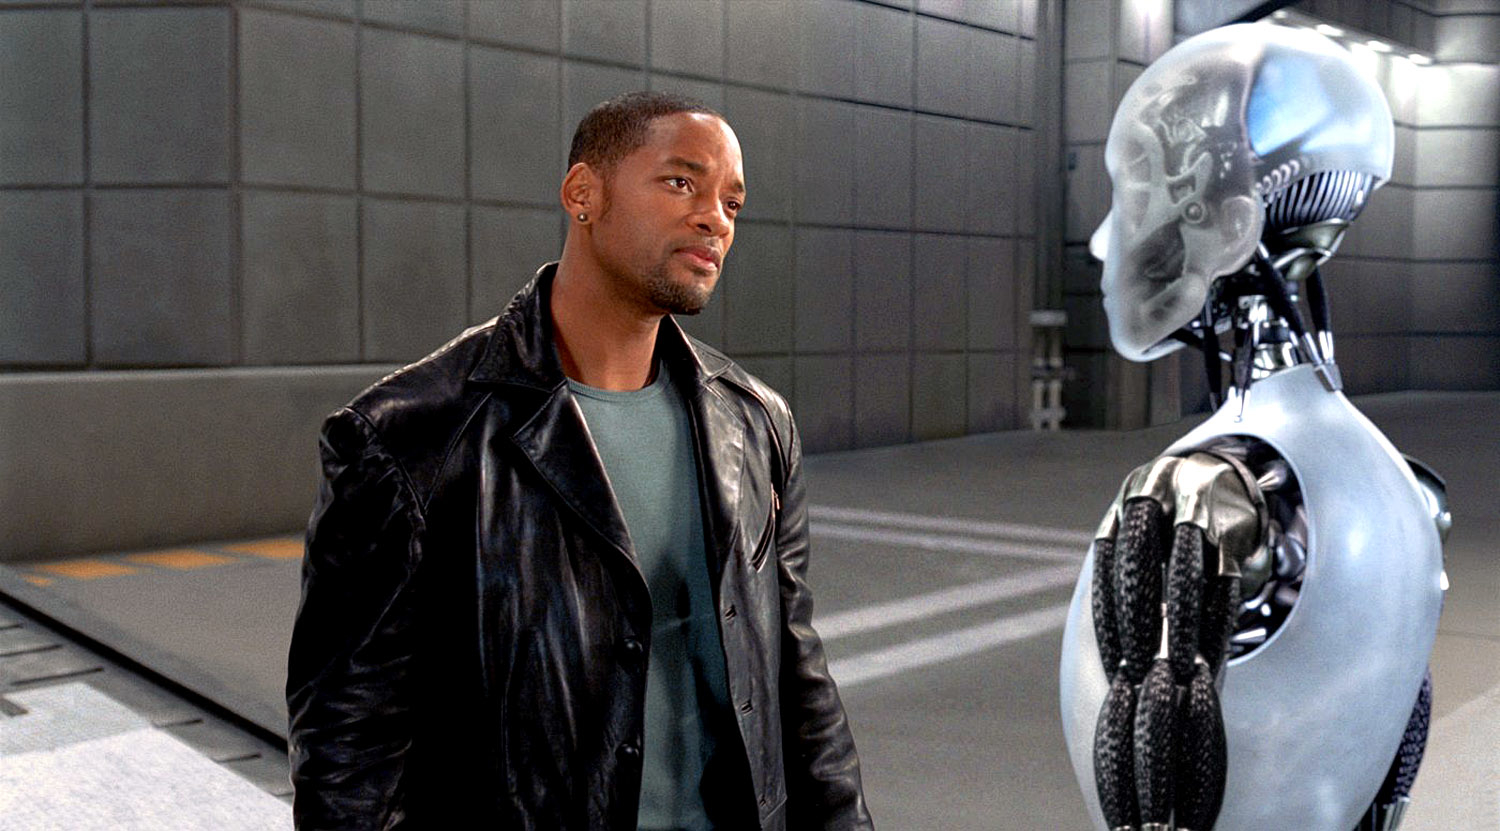 Will Smith, in a leather jacket, converses with a humanoid robot in a futuristic setting